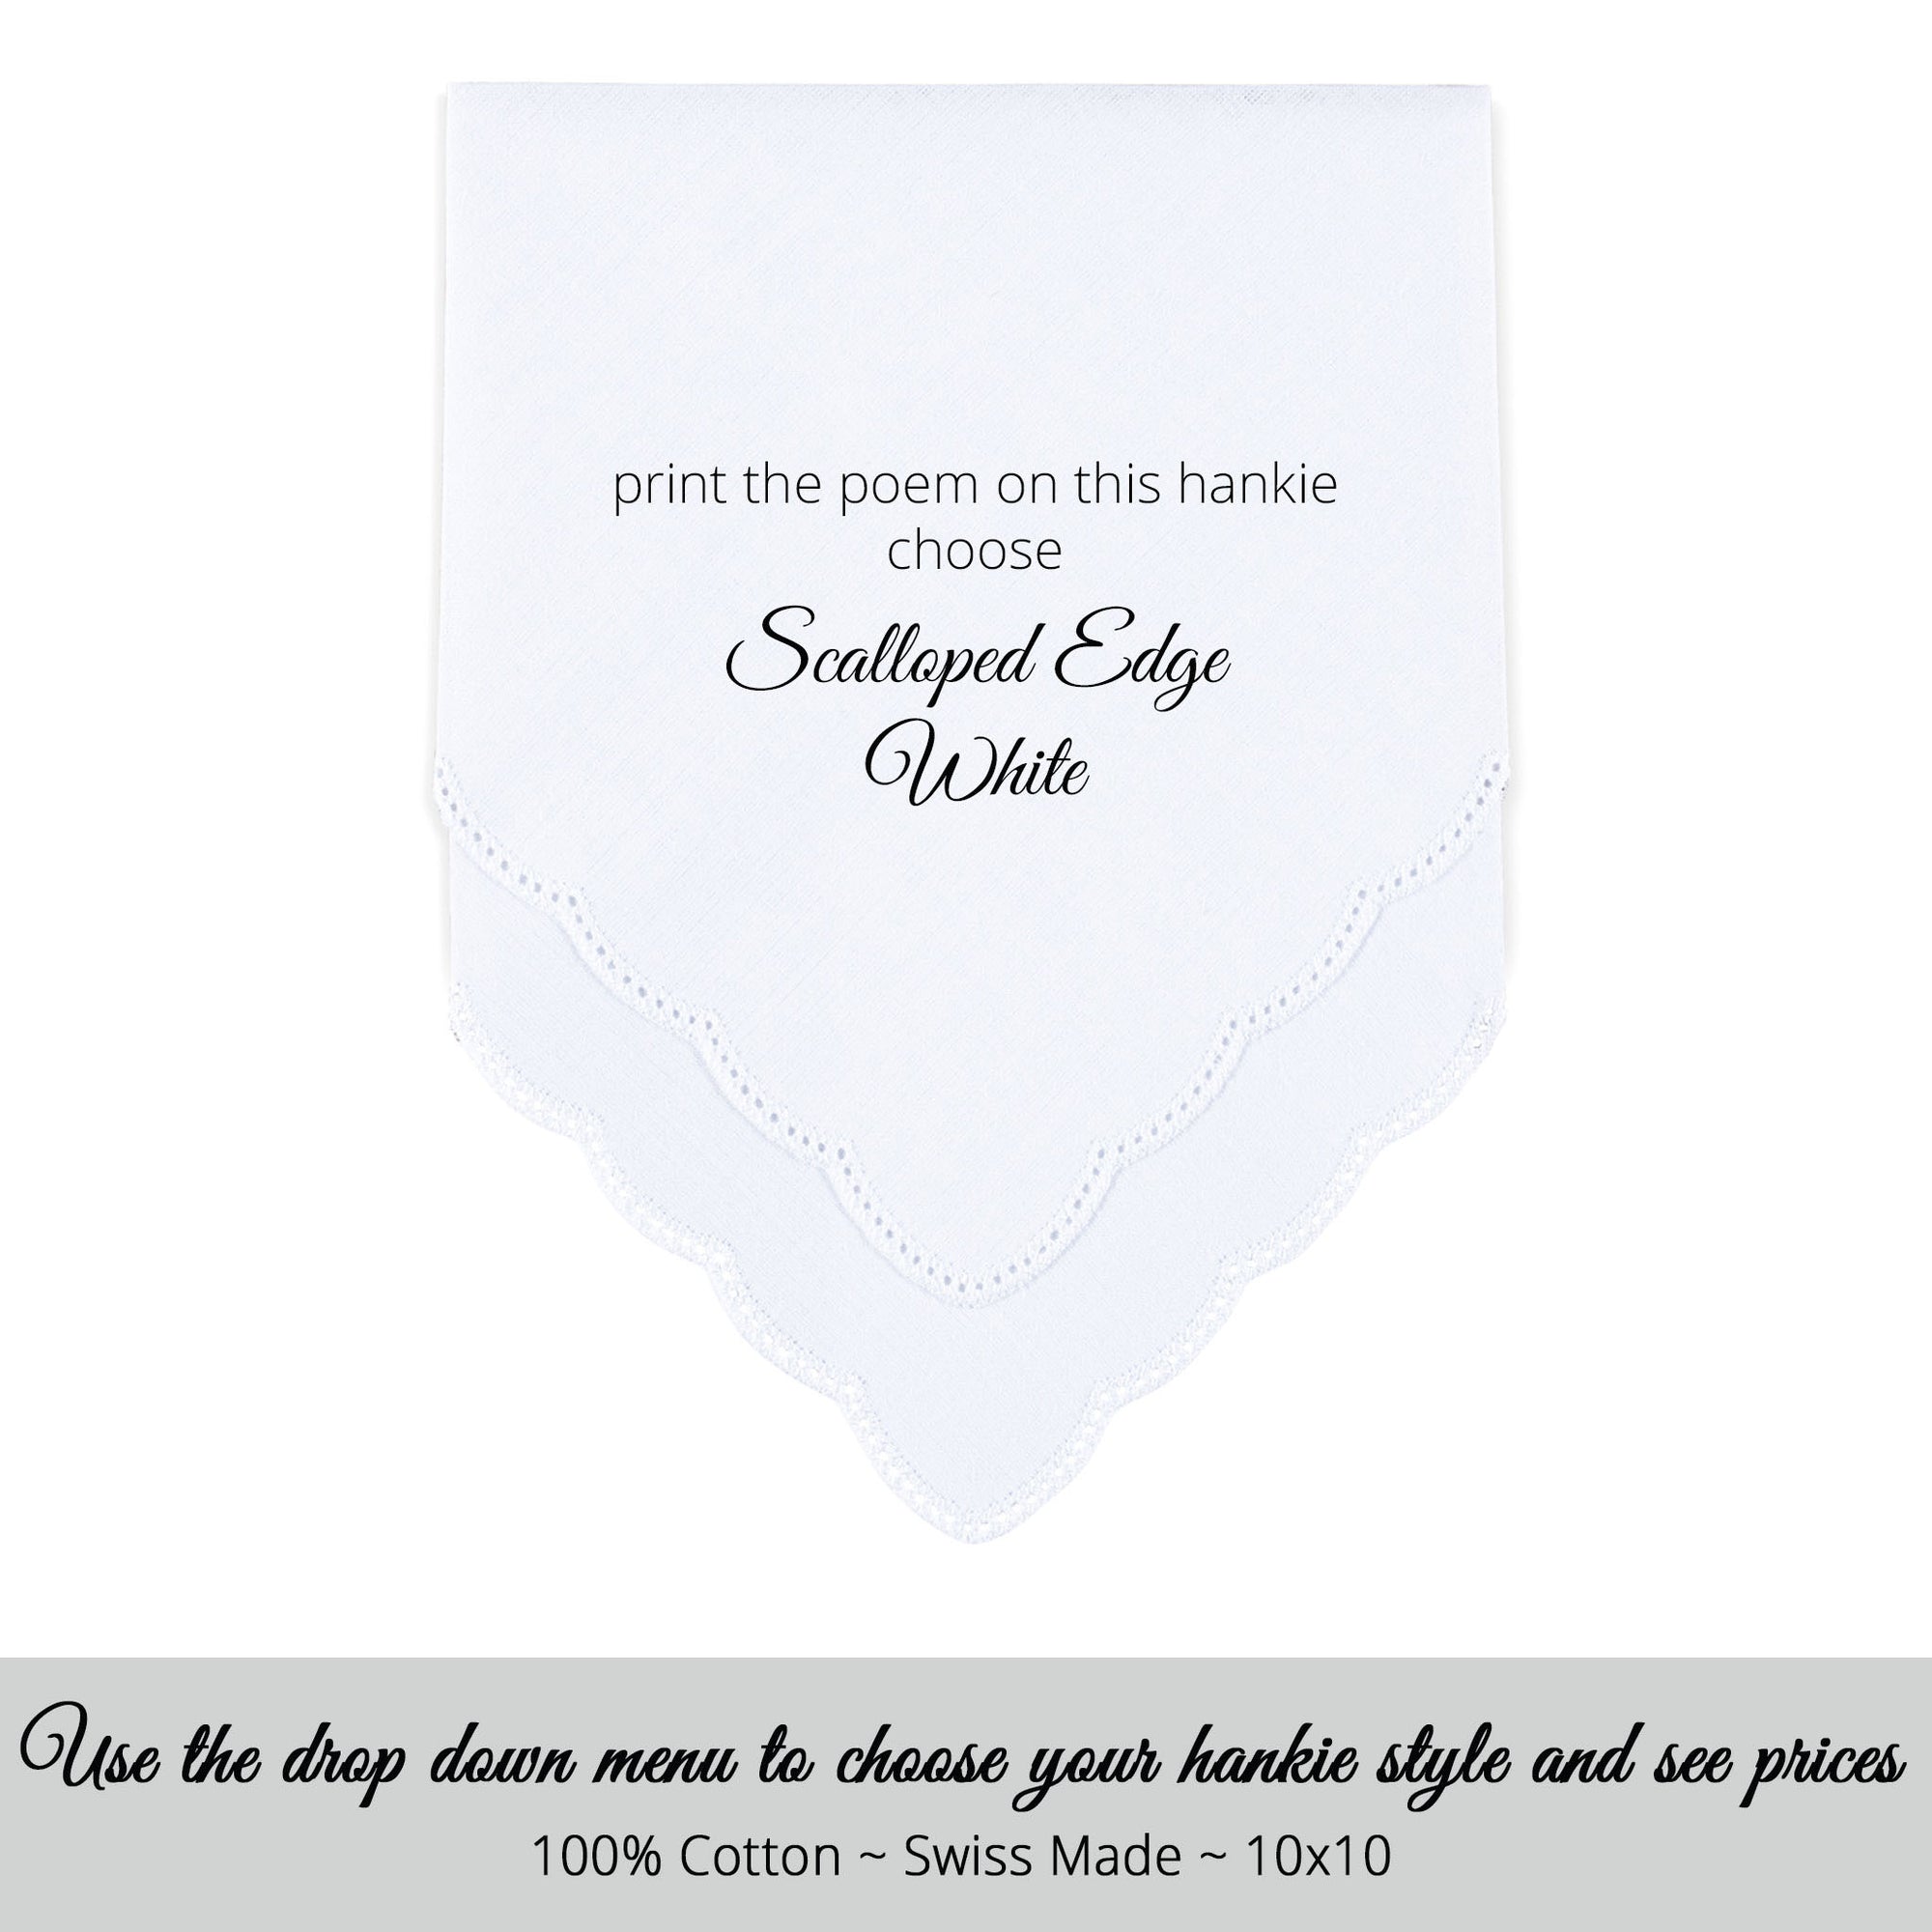 Wedding Handkerchief with scalloped edge white for mother of the bride printed with poem